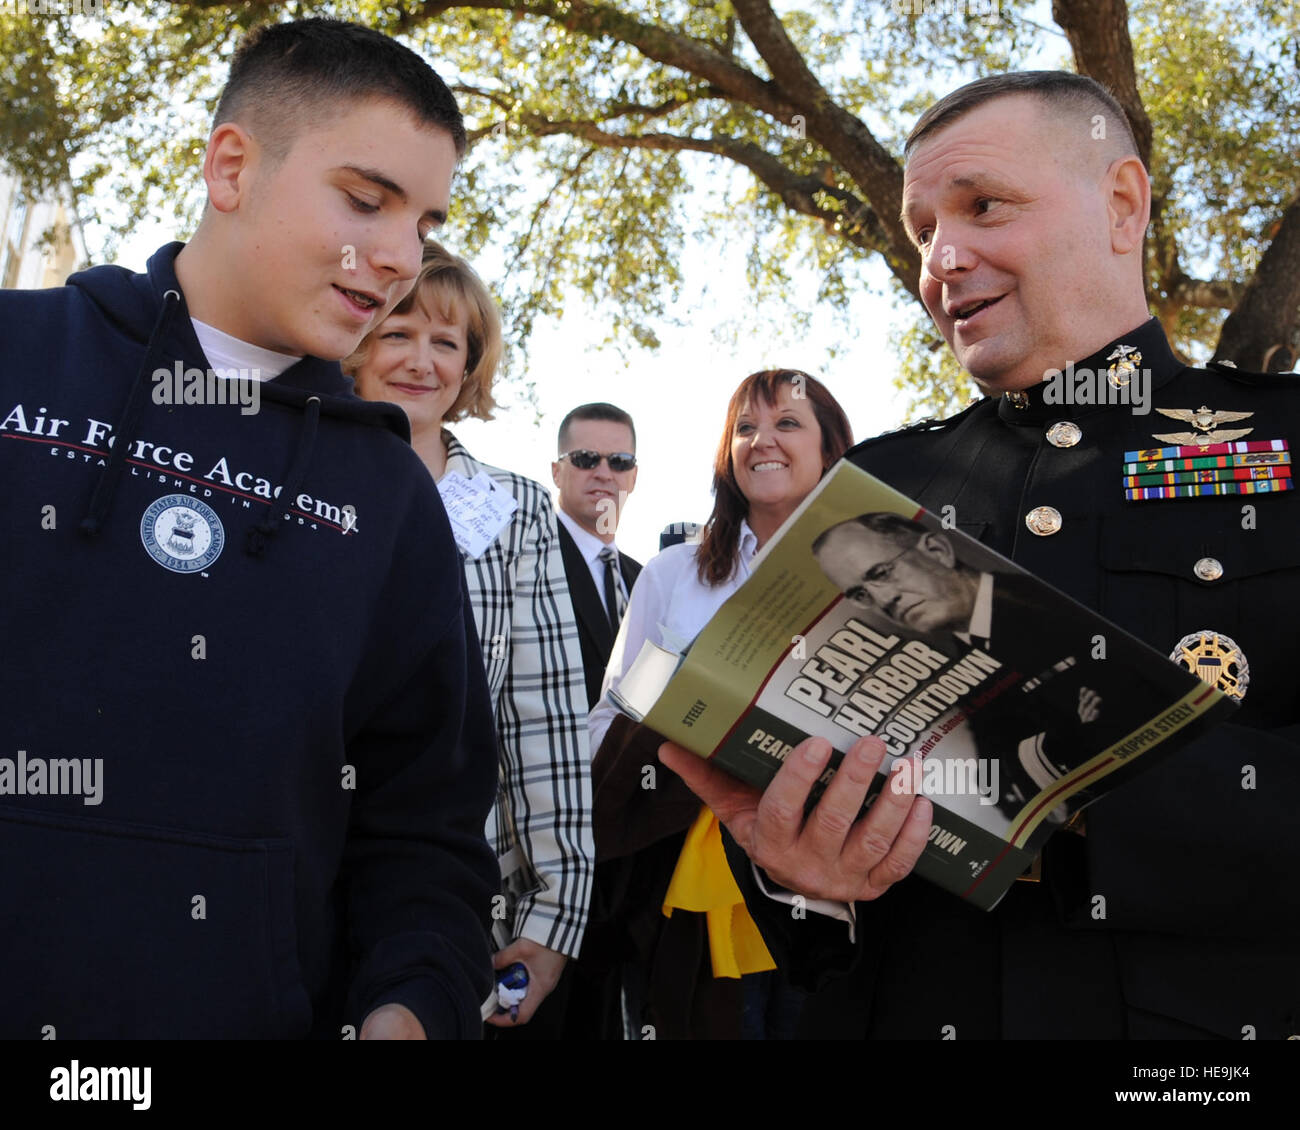 Vice Chairman of the Joint Chiefs of Staff U.S. Marine Gen. James E. Cartwright signs a book for Nick Cartwright at the Pearl Harbor Survivors Memorial Service in Fredericksburg, Texas, Dec. 7, 2008. Cartwright was the guest speaker at the event, held in front of The National Museum of the Pacific War in the hometown of U.S. Navy Fleet Adm. Chester W. Nimitz.  Air Force Master Sgt. Adam M. Stump. (Released) Stock Photo